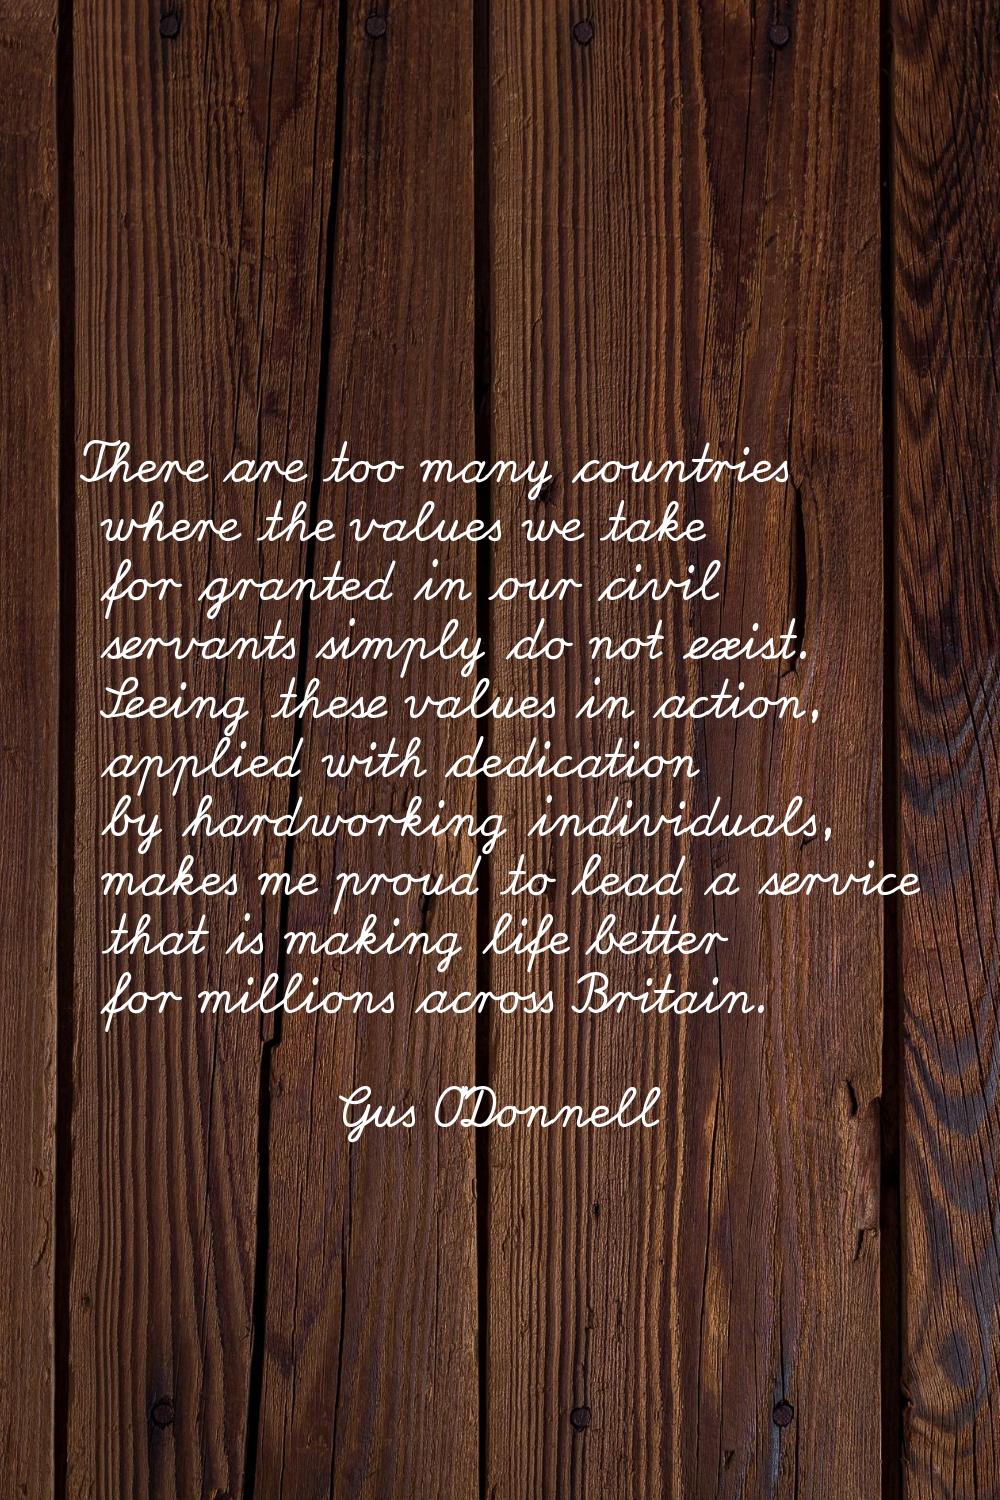 There are too many countries where the values we take for granted in our civil servants simply do n